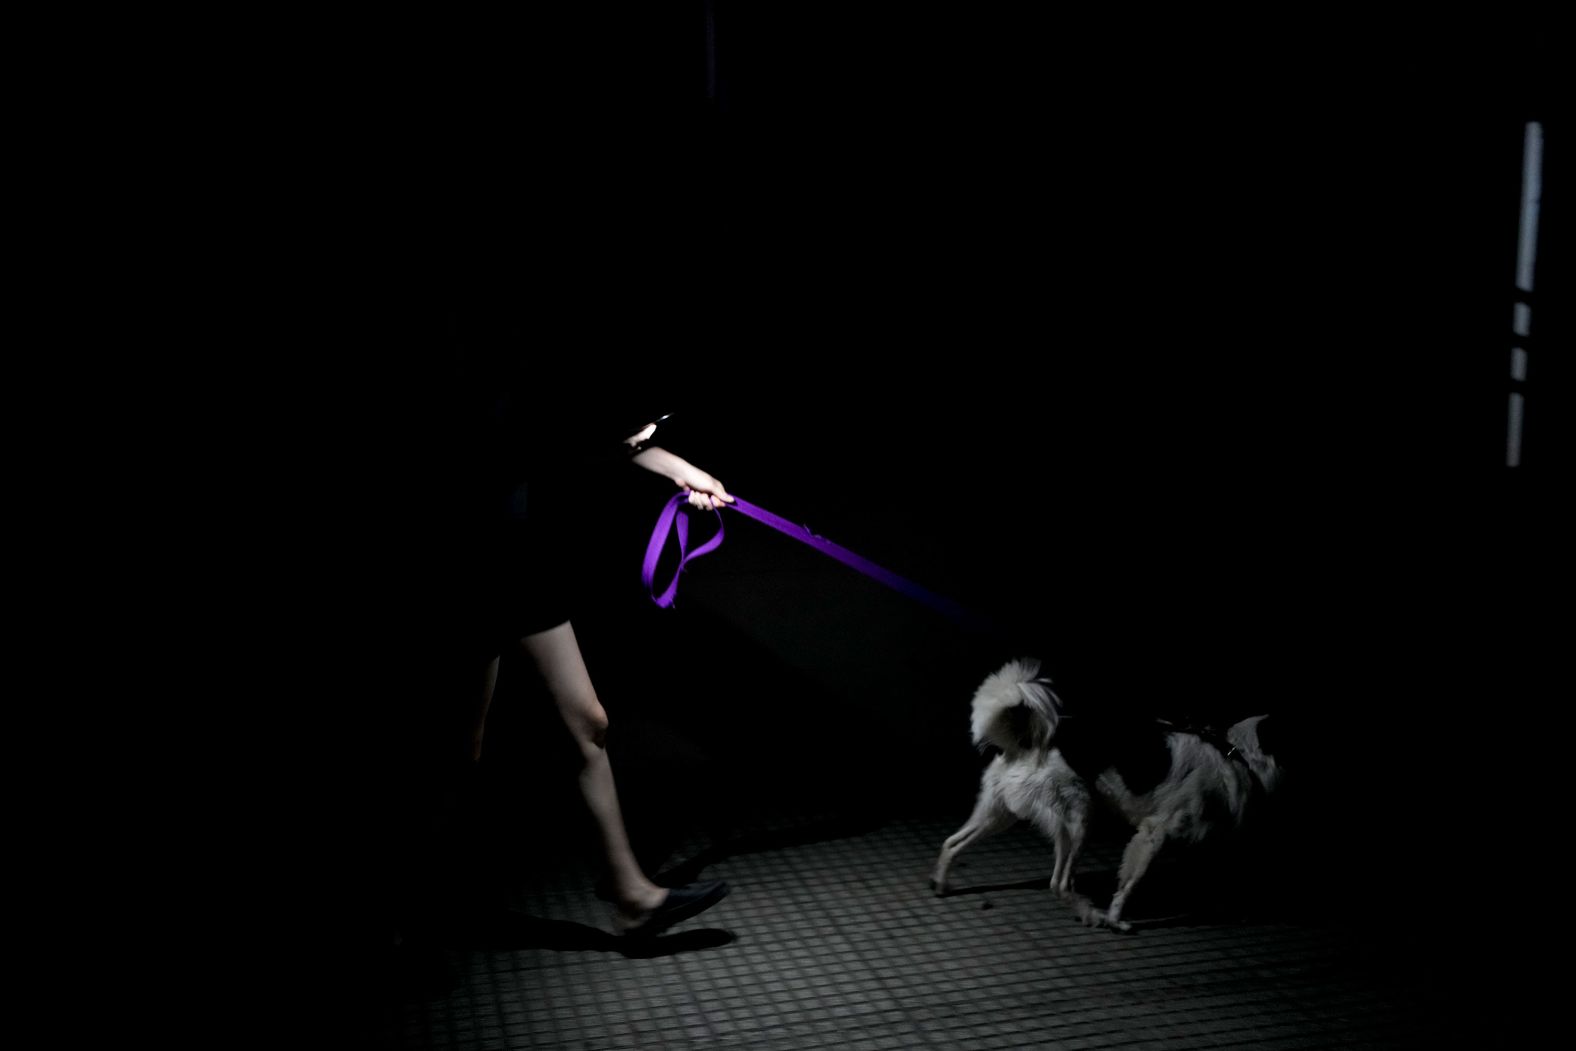 A resident walks her dog during a power outage amid a heat wave in Buenos Aires on Tuesday, March 14. Argentina is grappling with an unprecedented <a href="index.php?page=&url=https%3A%2F%2Fwww.cnn.com%2F2023%2F03%2F15%2Famericas%2Fargentina-record-heatwave-climate-intl%2Findex.html" target="_blank">late-summer heatwave</a> as temperatures soar to record-breaking levels.